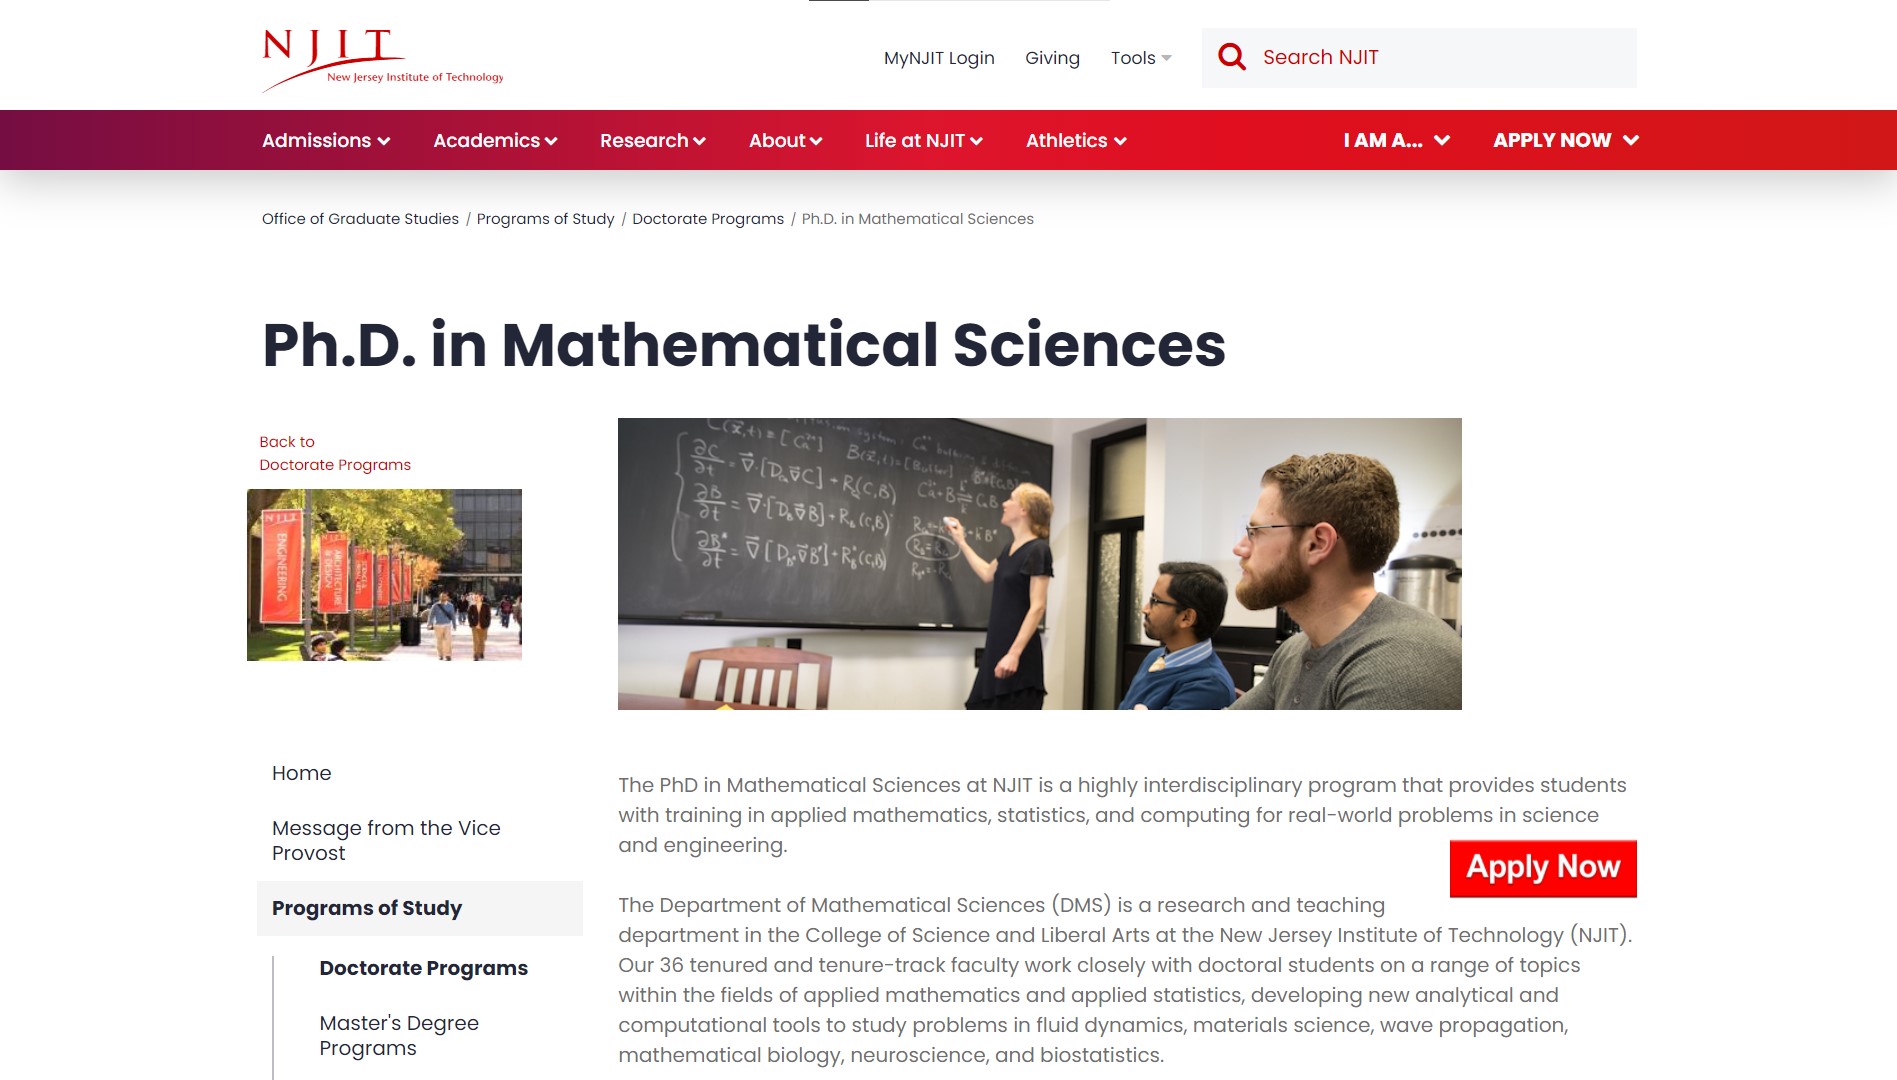 PhD programs in applied mathematics and applied statistics at NJIT